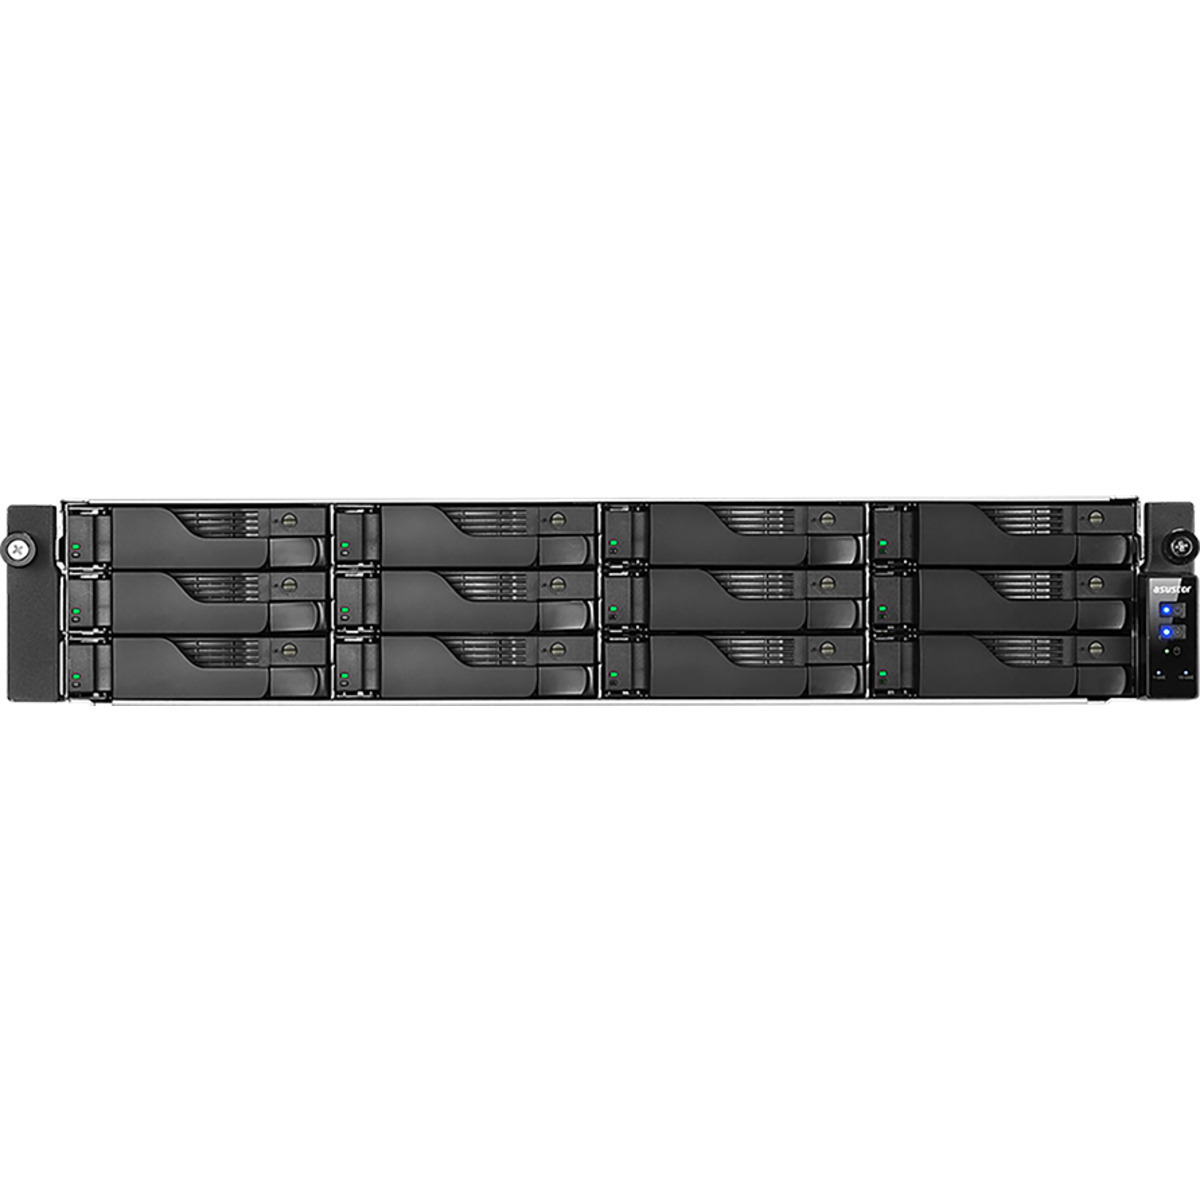 buy ASUSTOR LOCKERSTOR 12RD AS6512RD 24tb RackMount NAS - Network Attached Storage Device 12x2000gb Seagate IronWolf Pro ST2000NT001 3.5 7200rpm SATA 6Gb/s HDD NAS Class Drives Installed - Burn-In Tested - FREE RAM UPGRADE - nas headquarters buy network attached storage server device das new raid-5 free shipping simply usa LOCKERSTOR 12RD AS6512RD